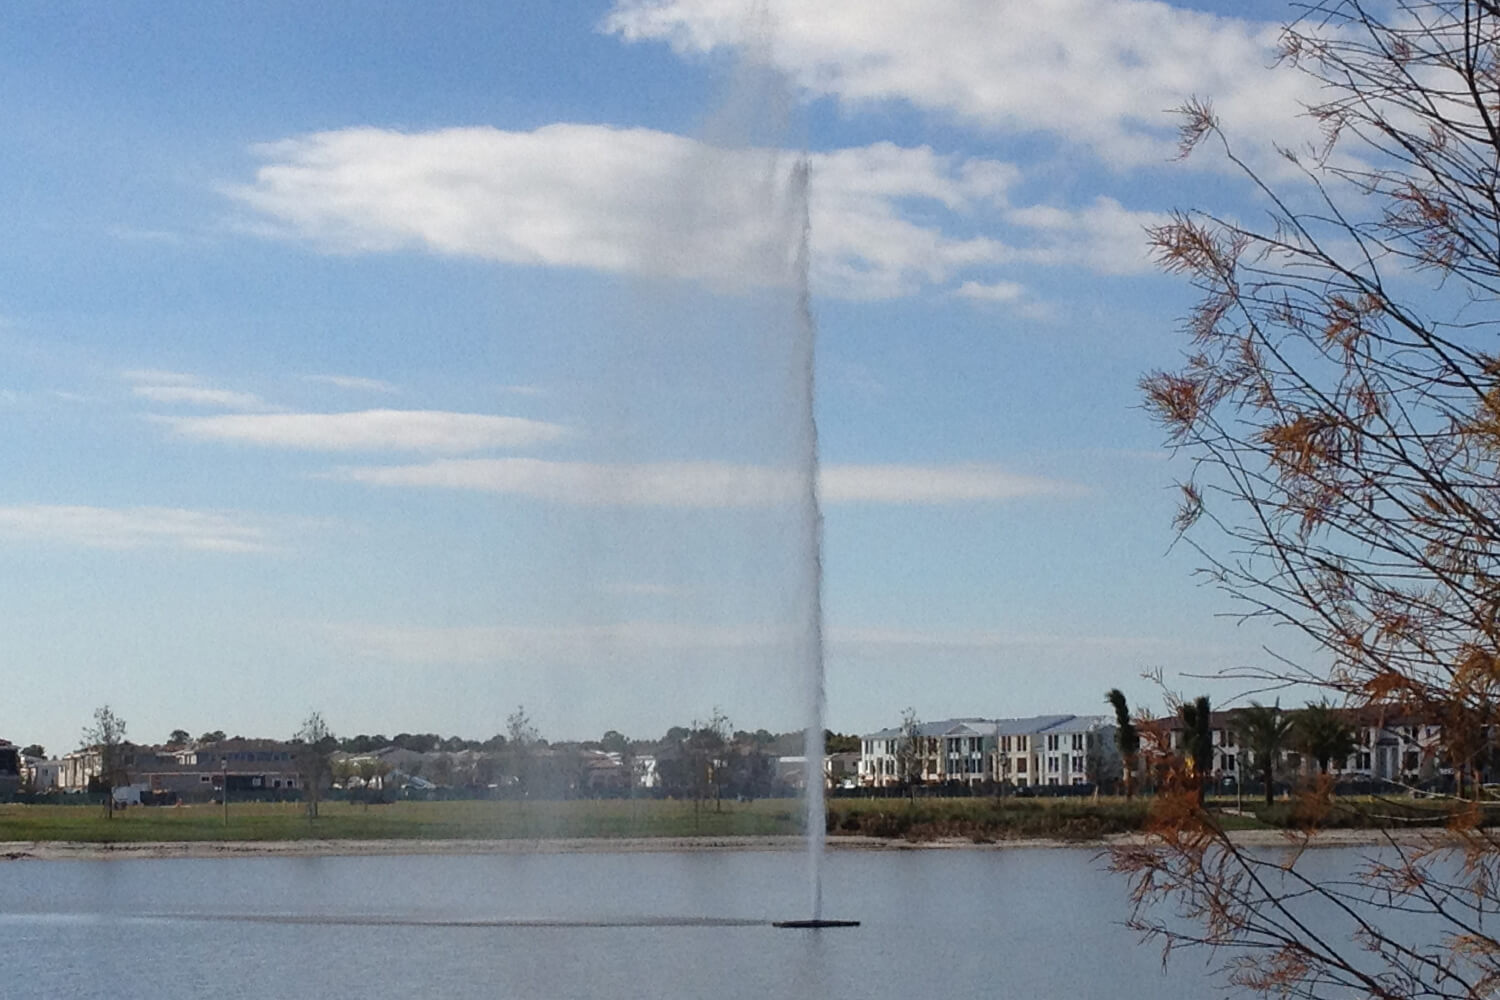 One of Otterbine's Super Nova Giant Fountains in a residential area